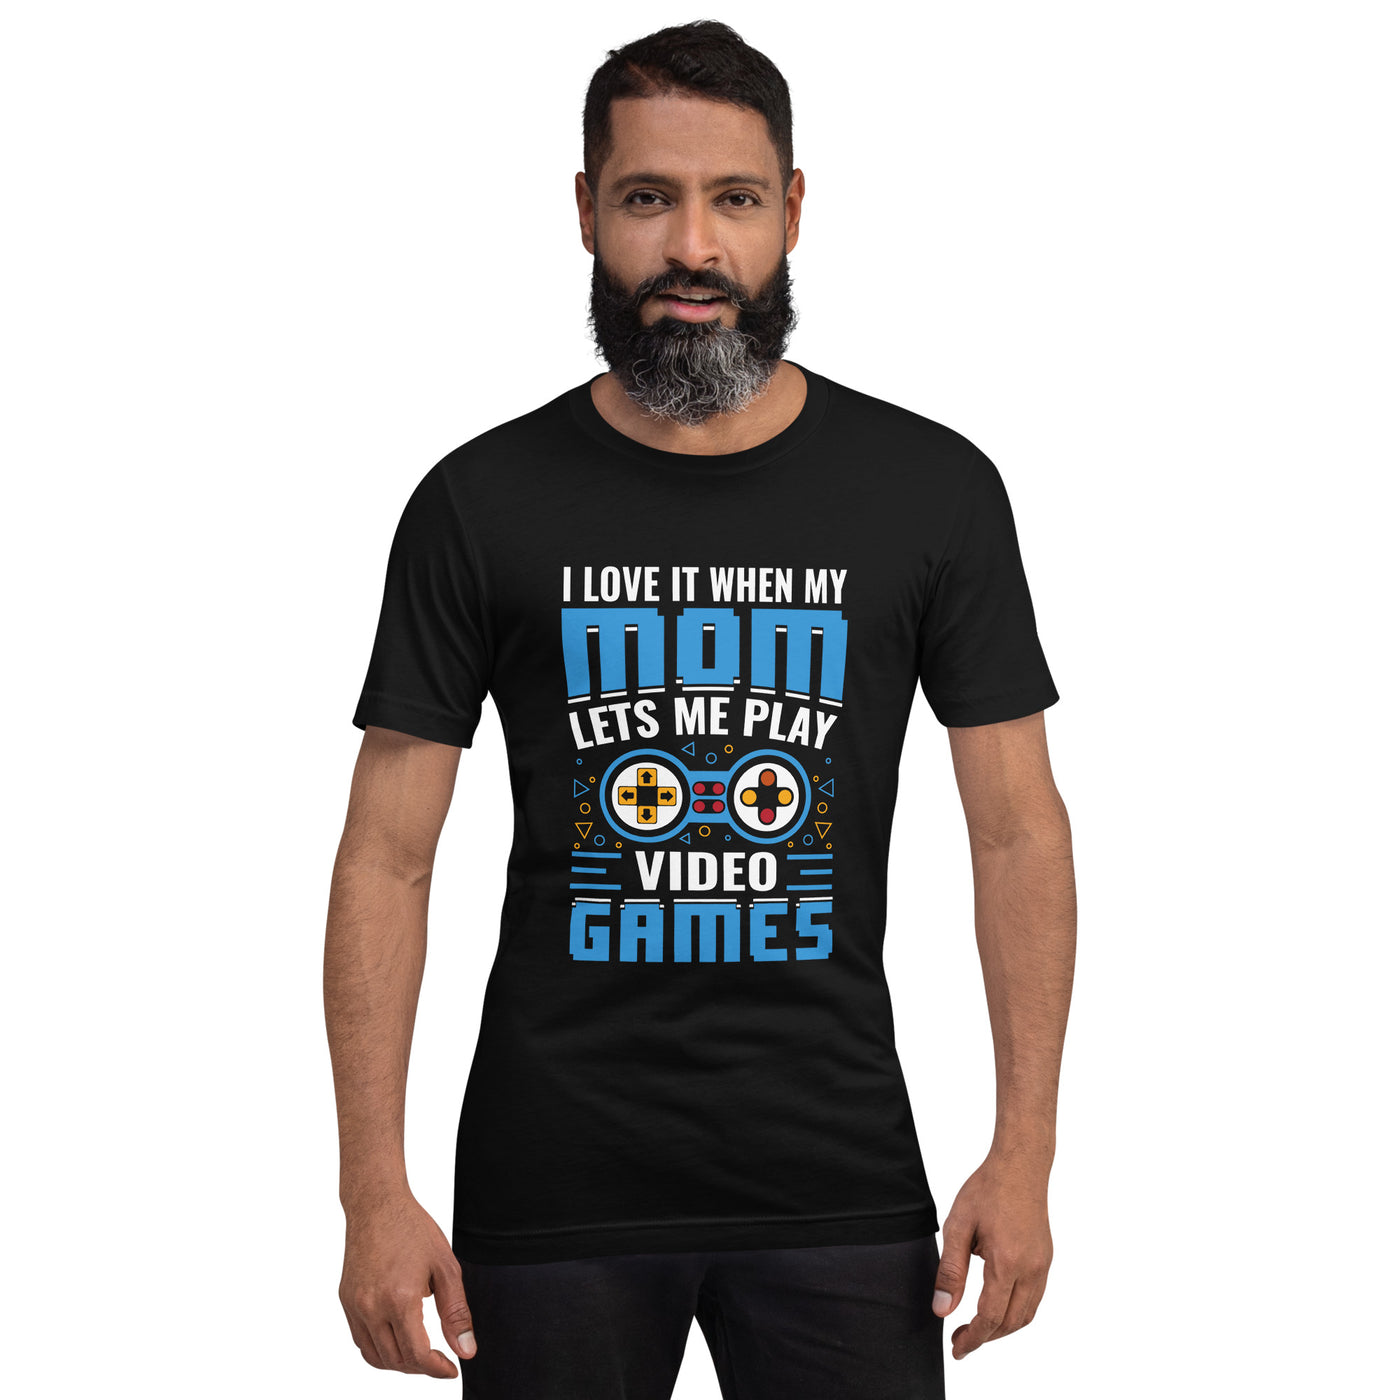 I Love it when my mom lets me Play Video Games Rima - Unisex t-shirt